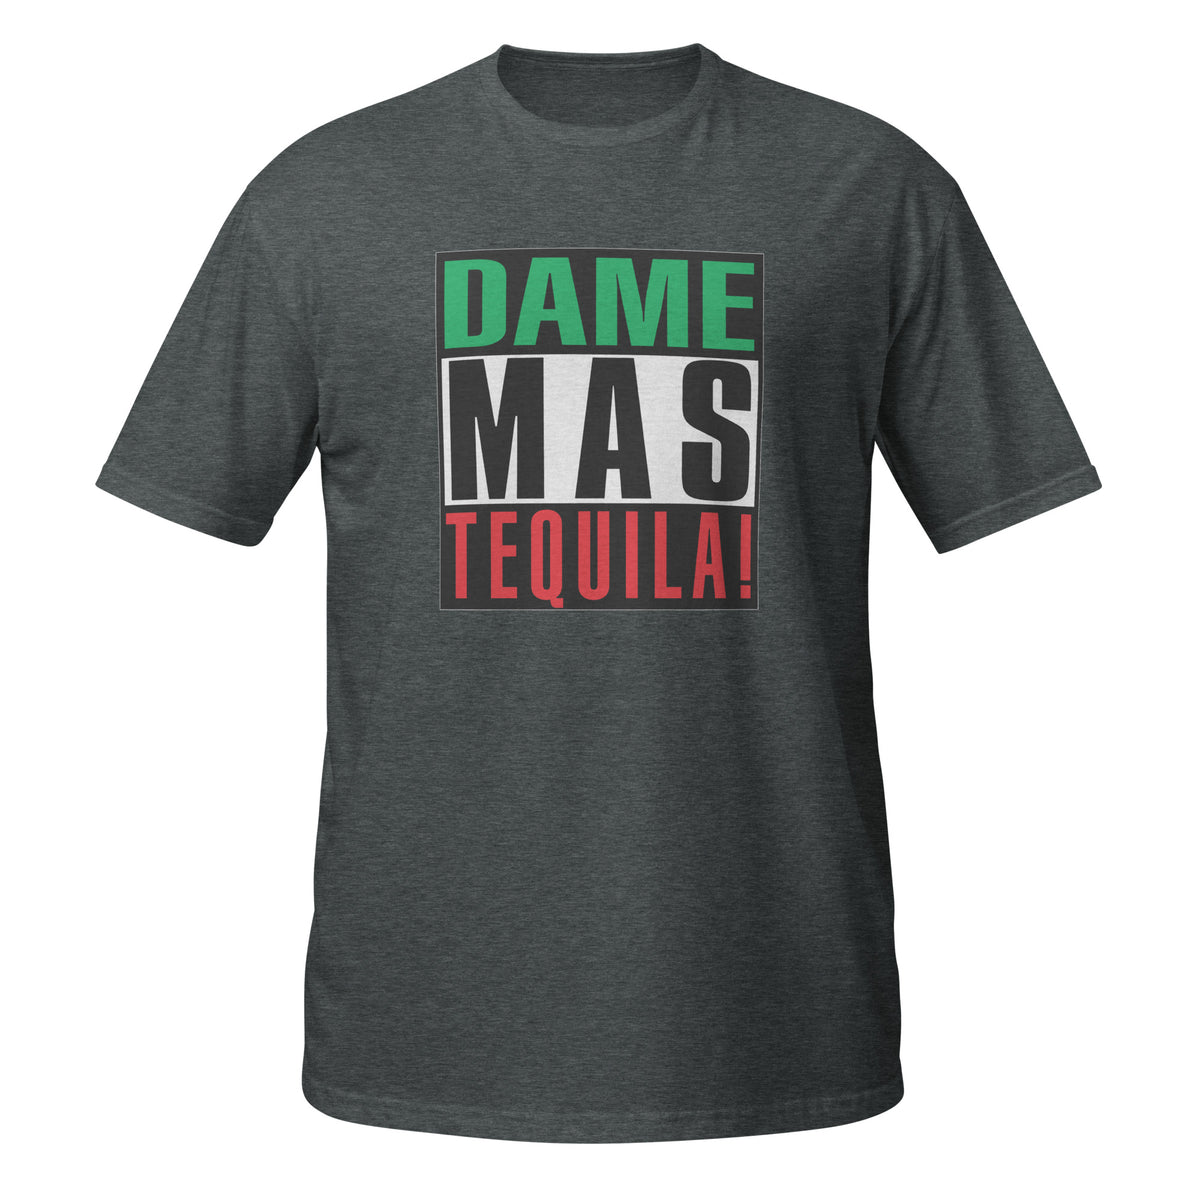 Dame Más Tequila T-Shirt (Give me more tequila)